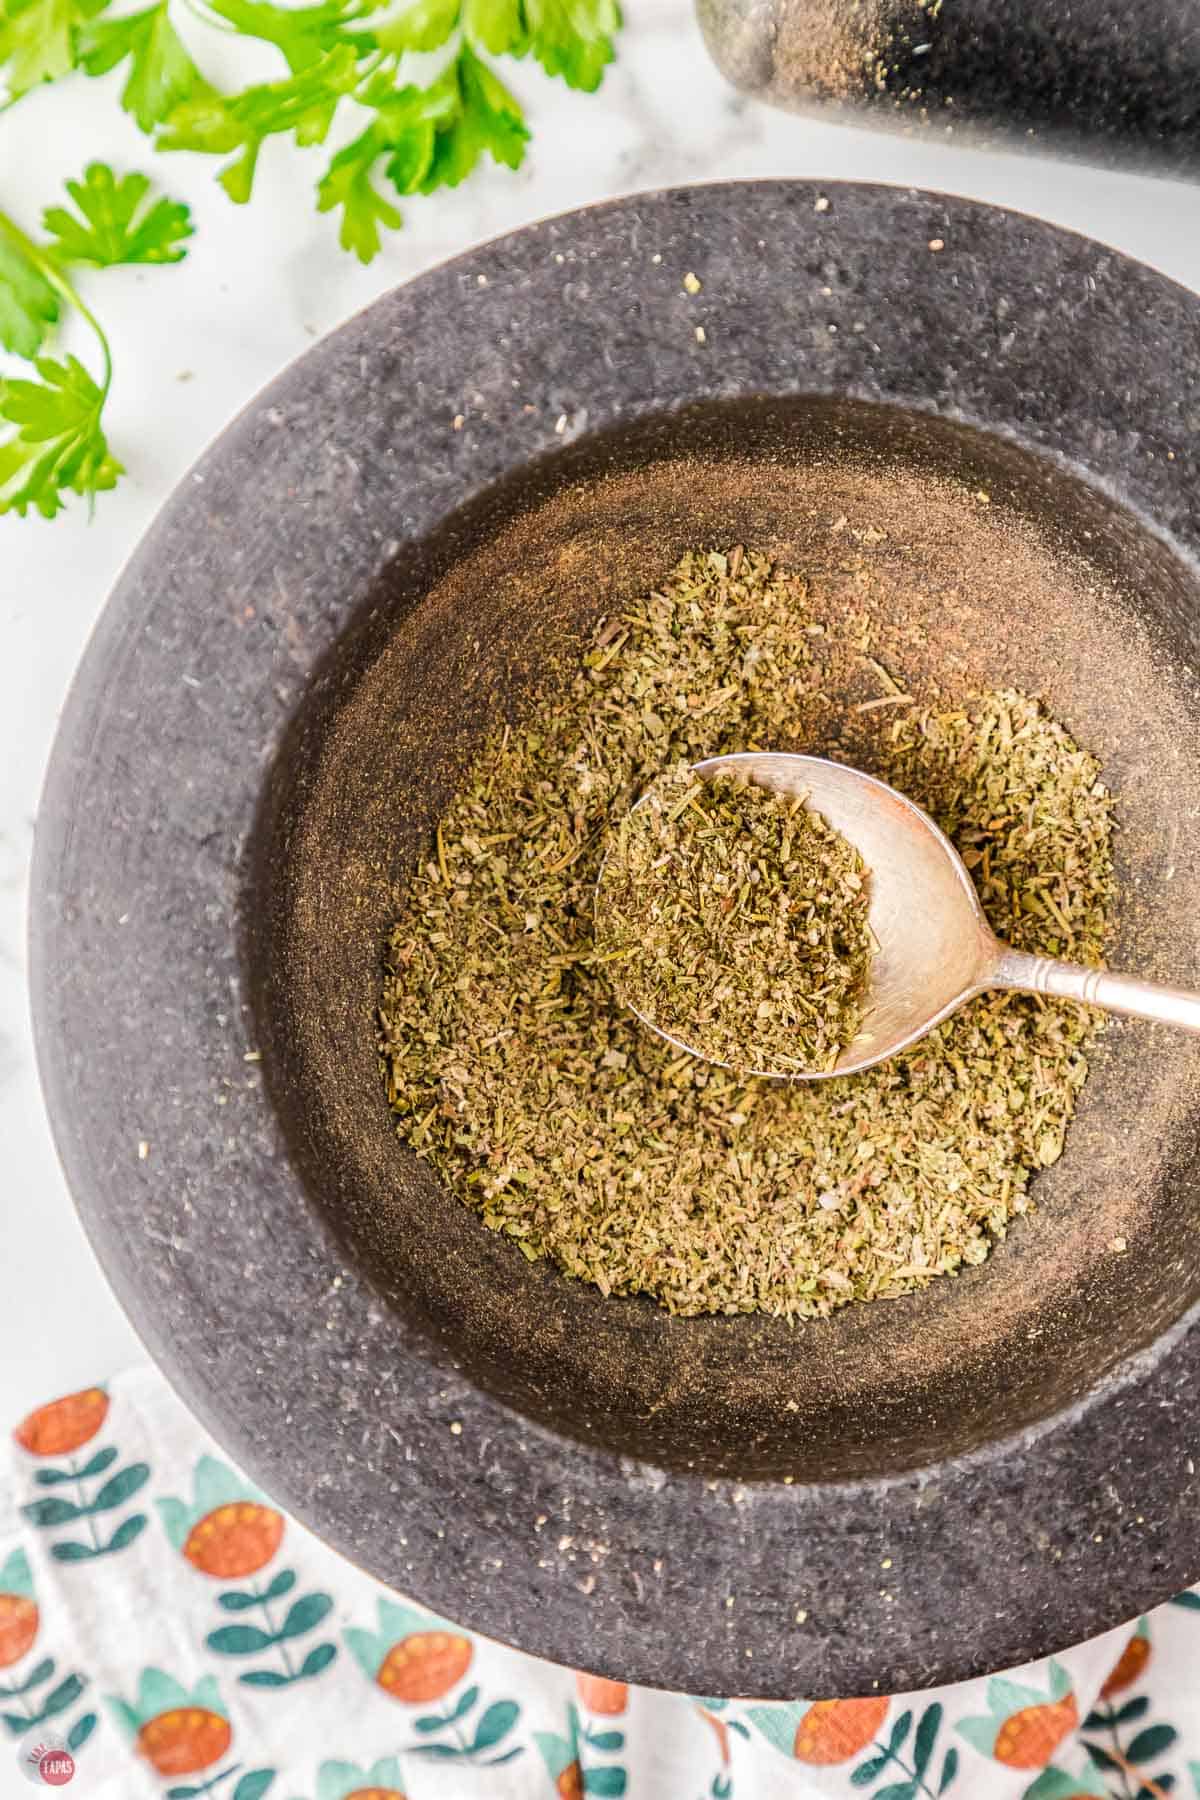 make your own poultry seasoning because it tastes better